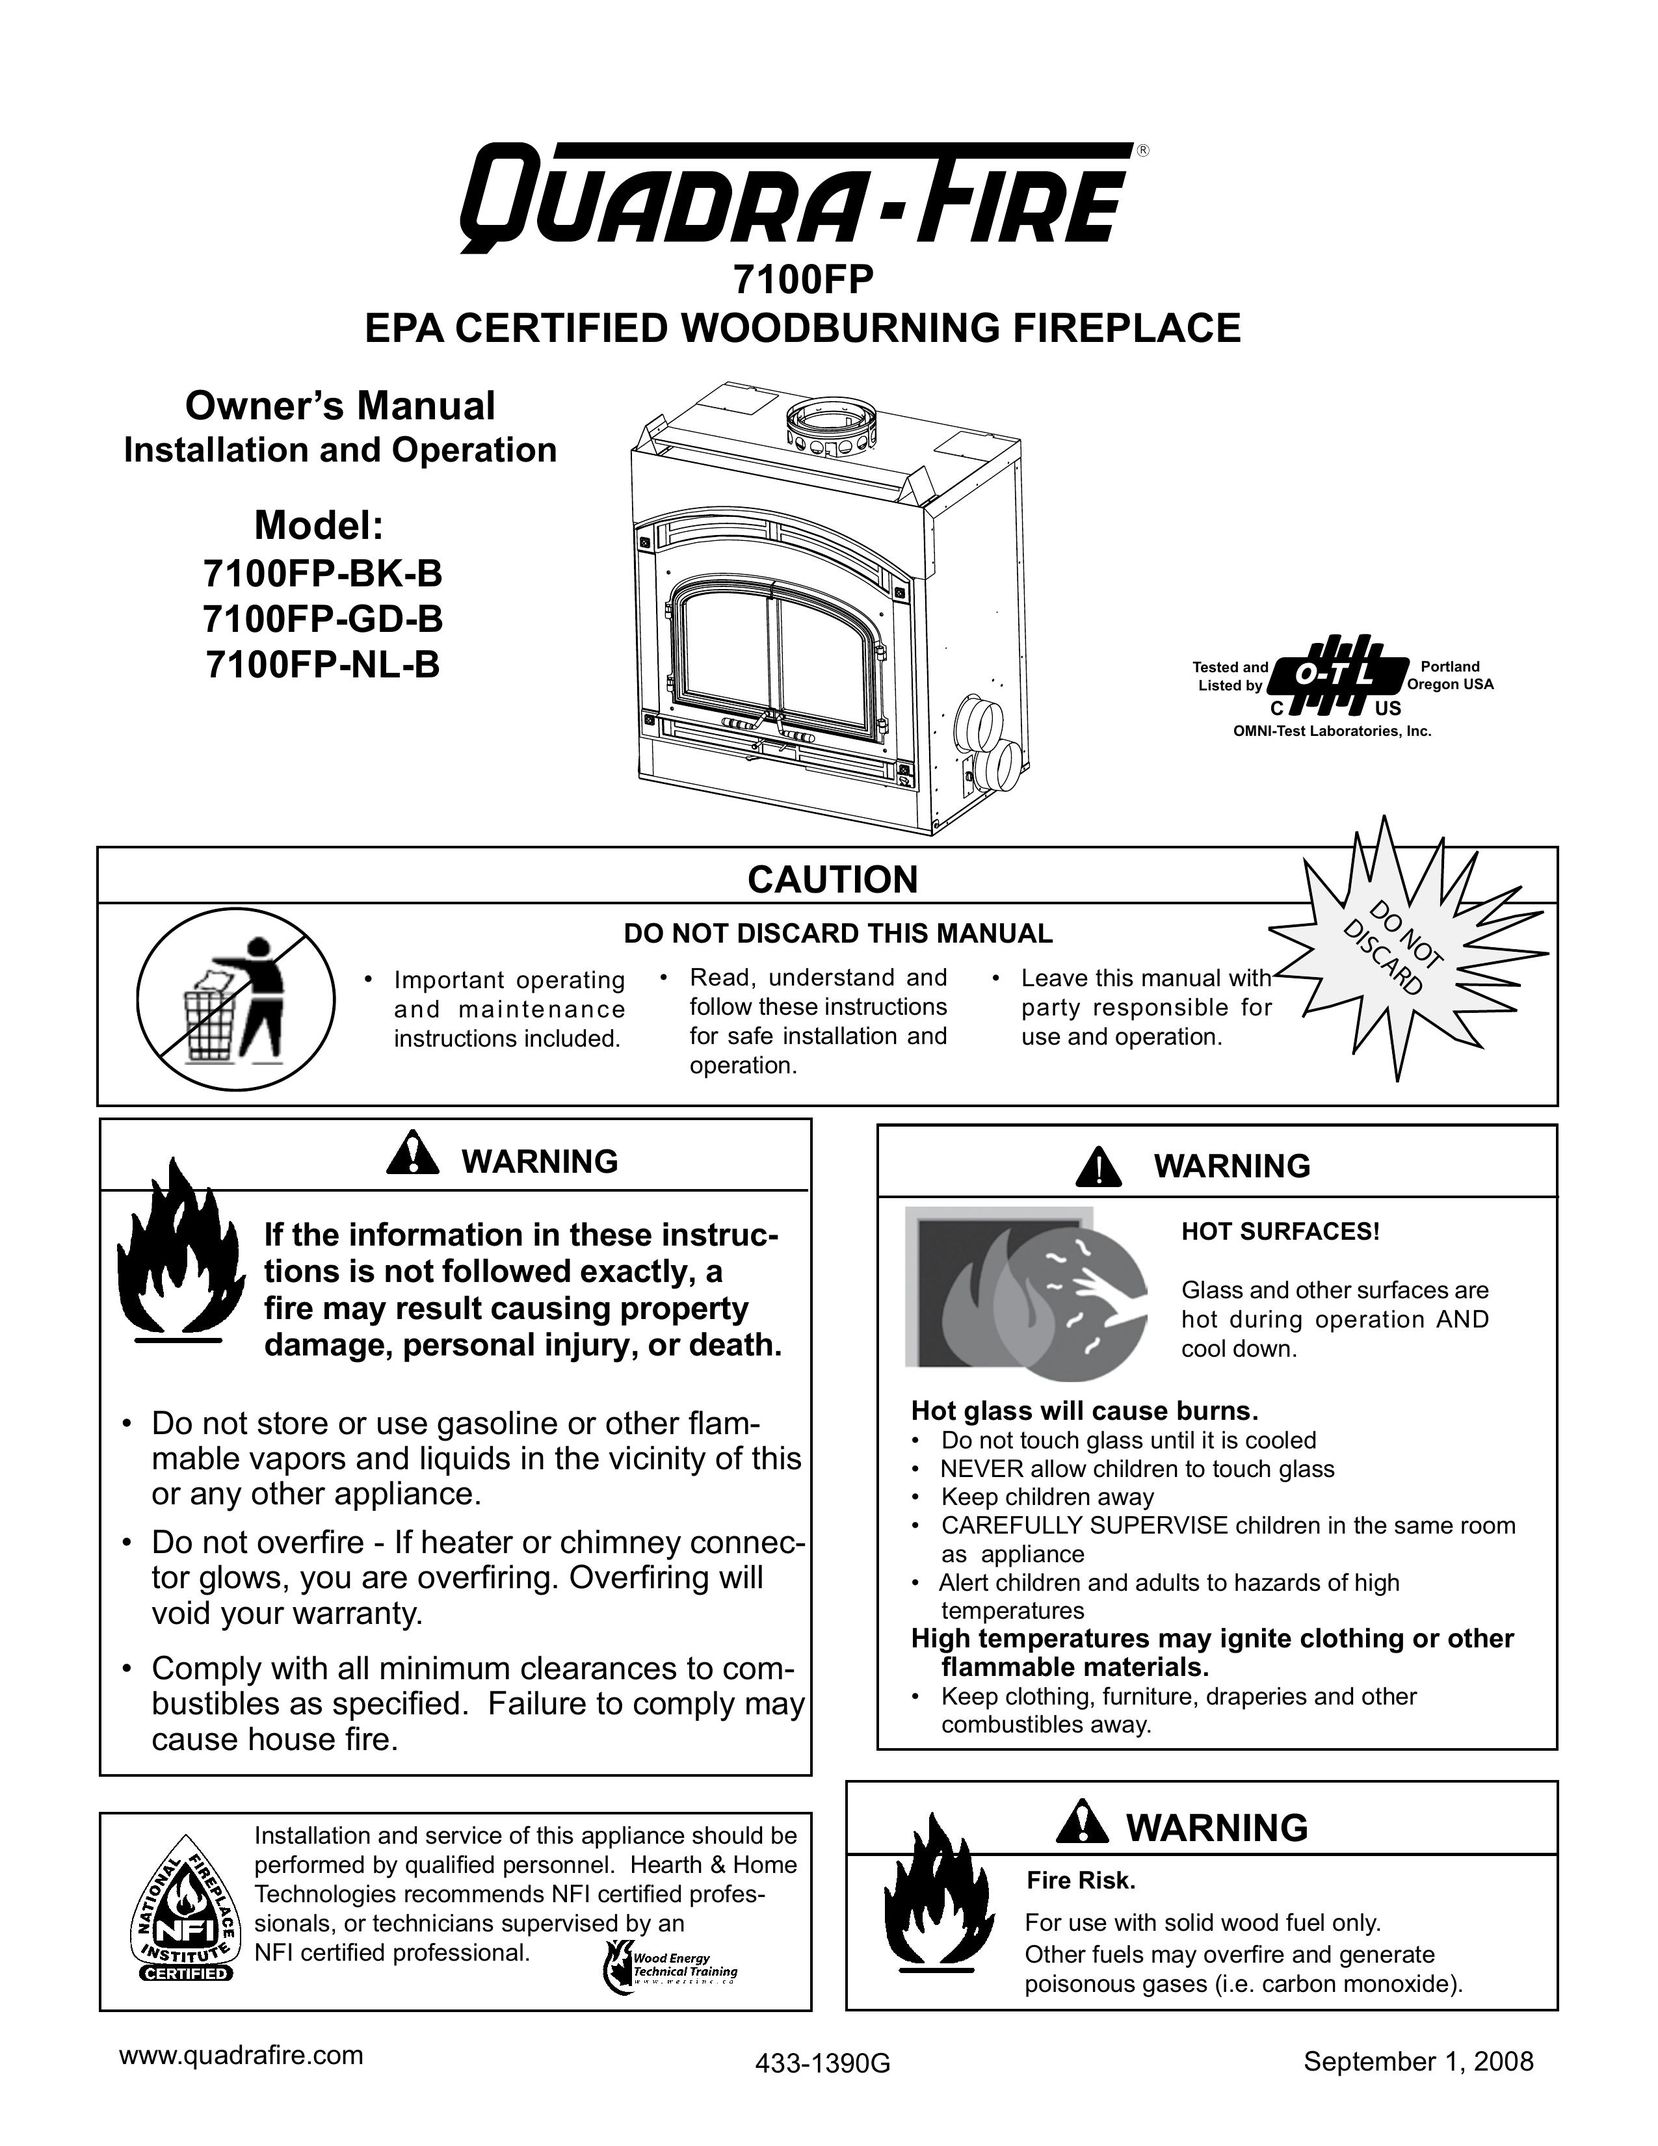 Hearth and Home Technologies 7100FP-BK-B Indoor Fireplace User Manual